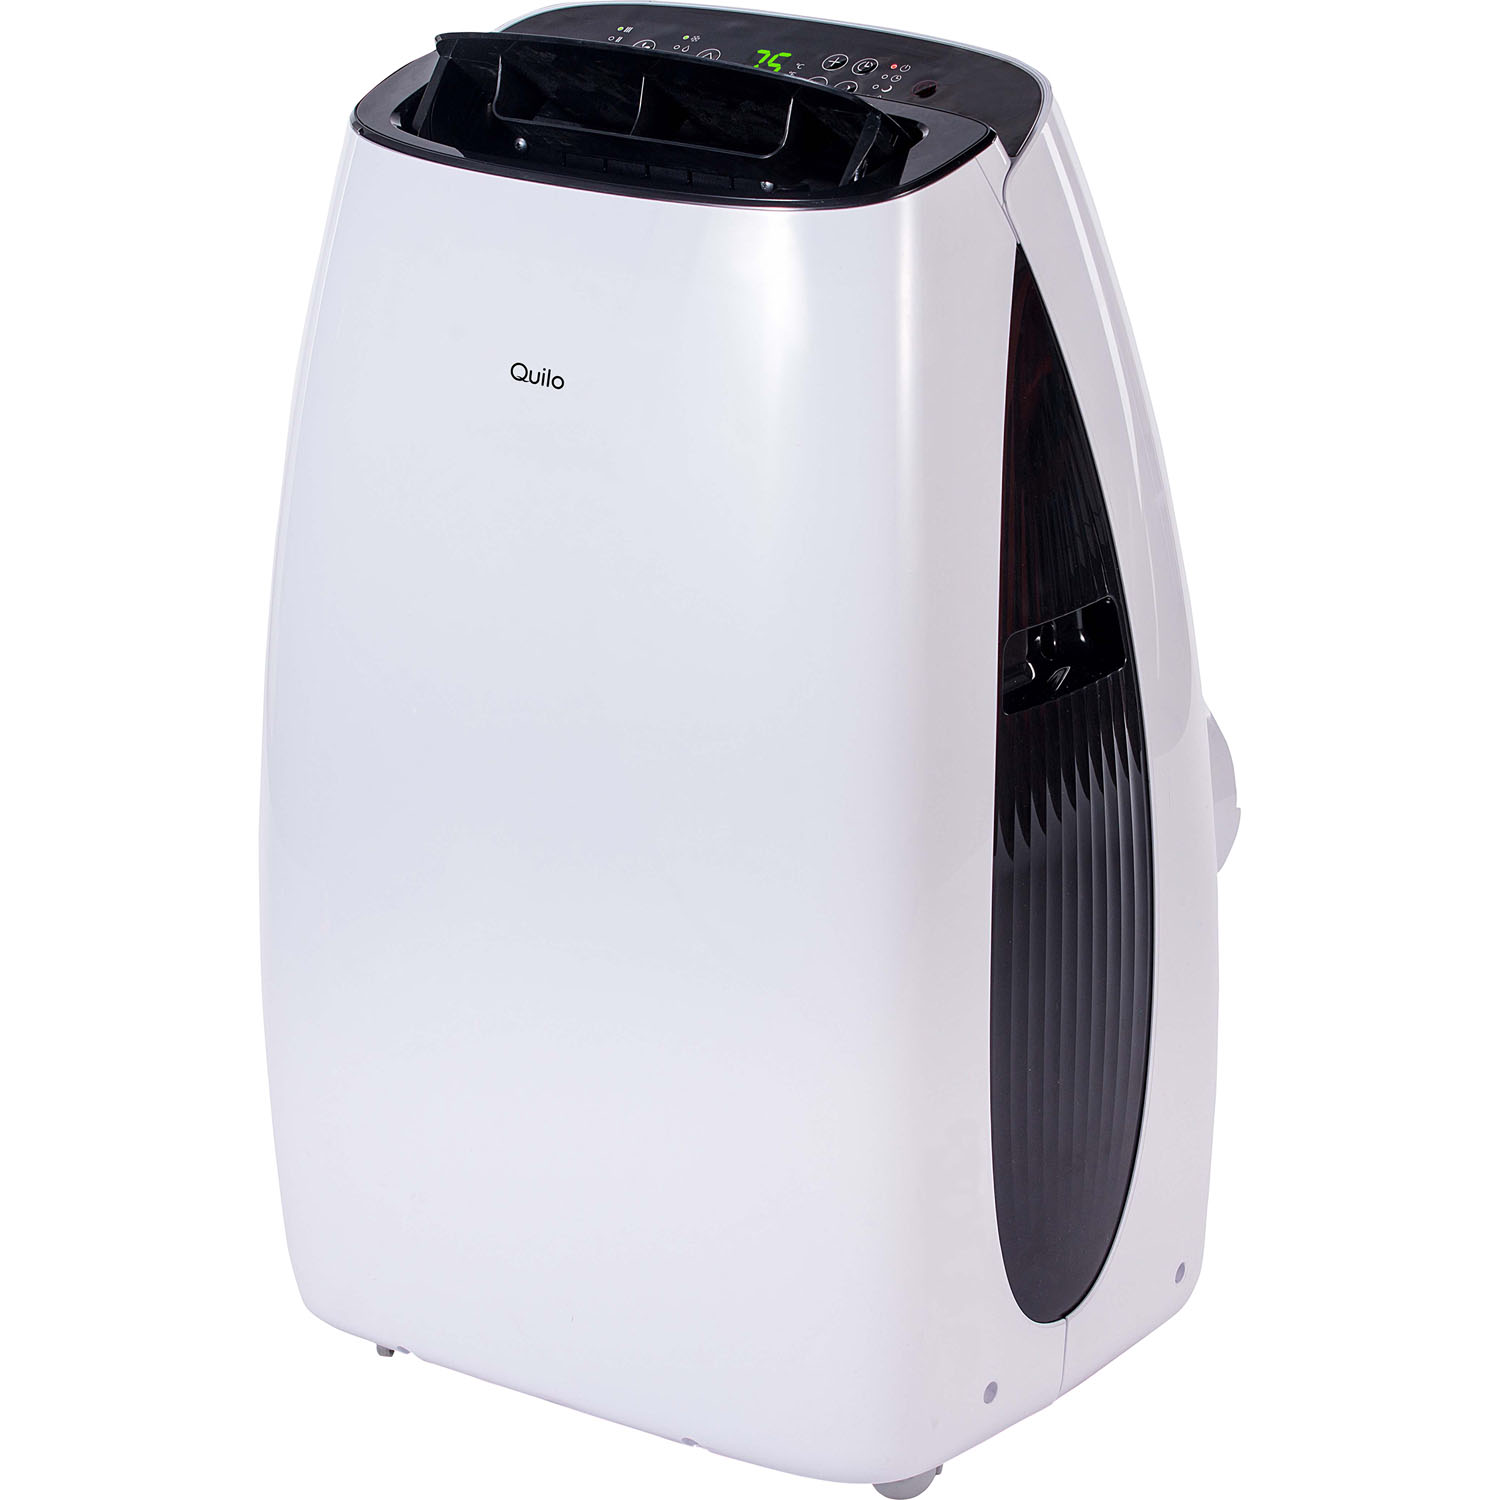 Quilo Portable Air Conditioner with Remote Control for a Room up to 550 Sq. Ft. - image 2 of 9